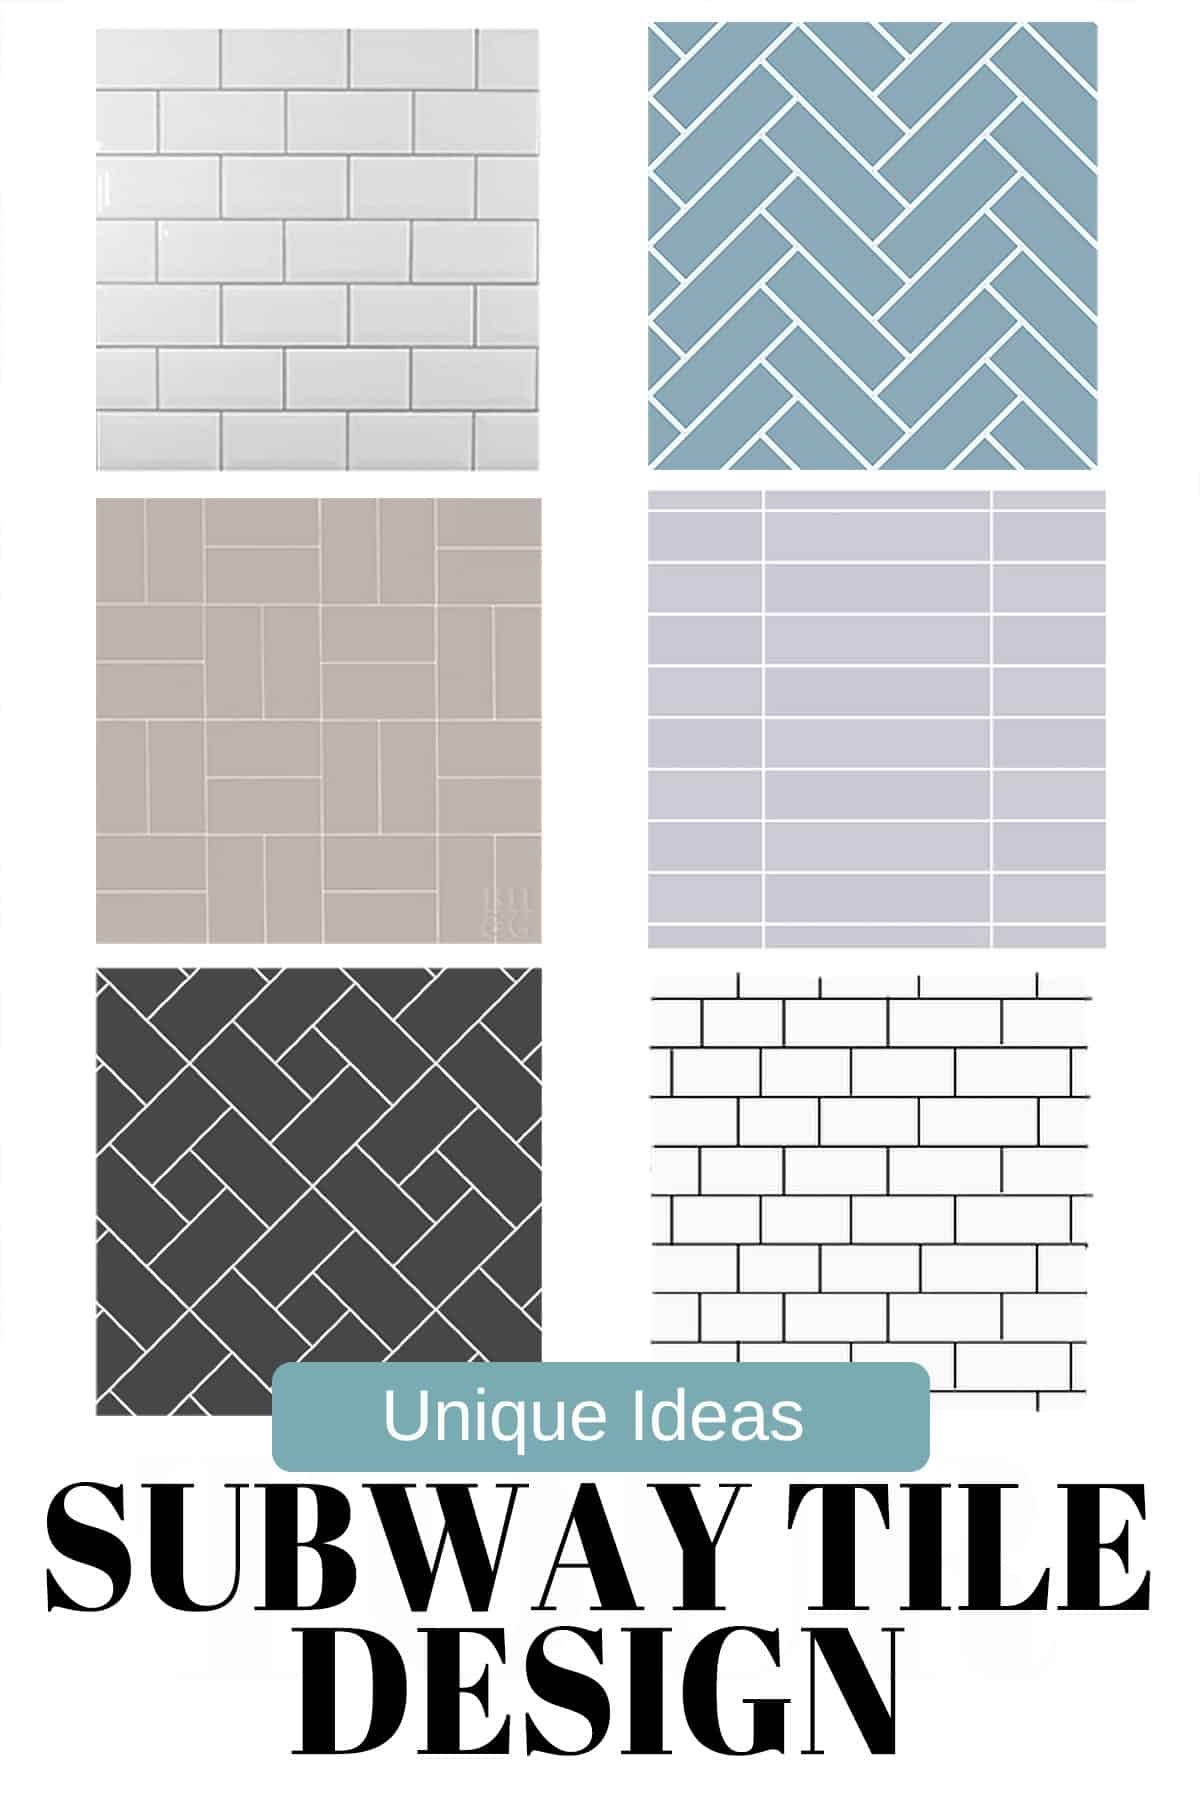 Collage of various subway tile patterns and designs with title.